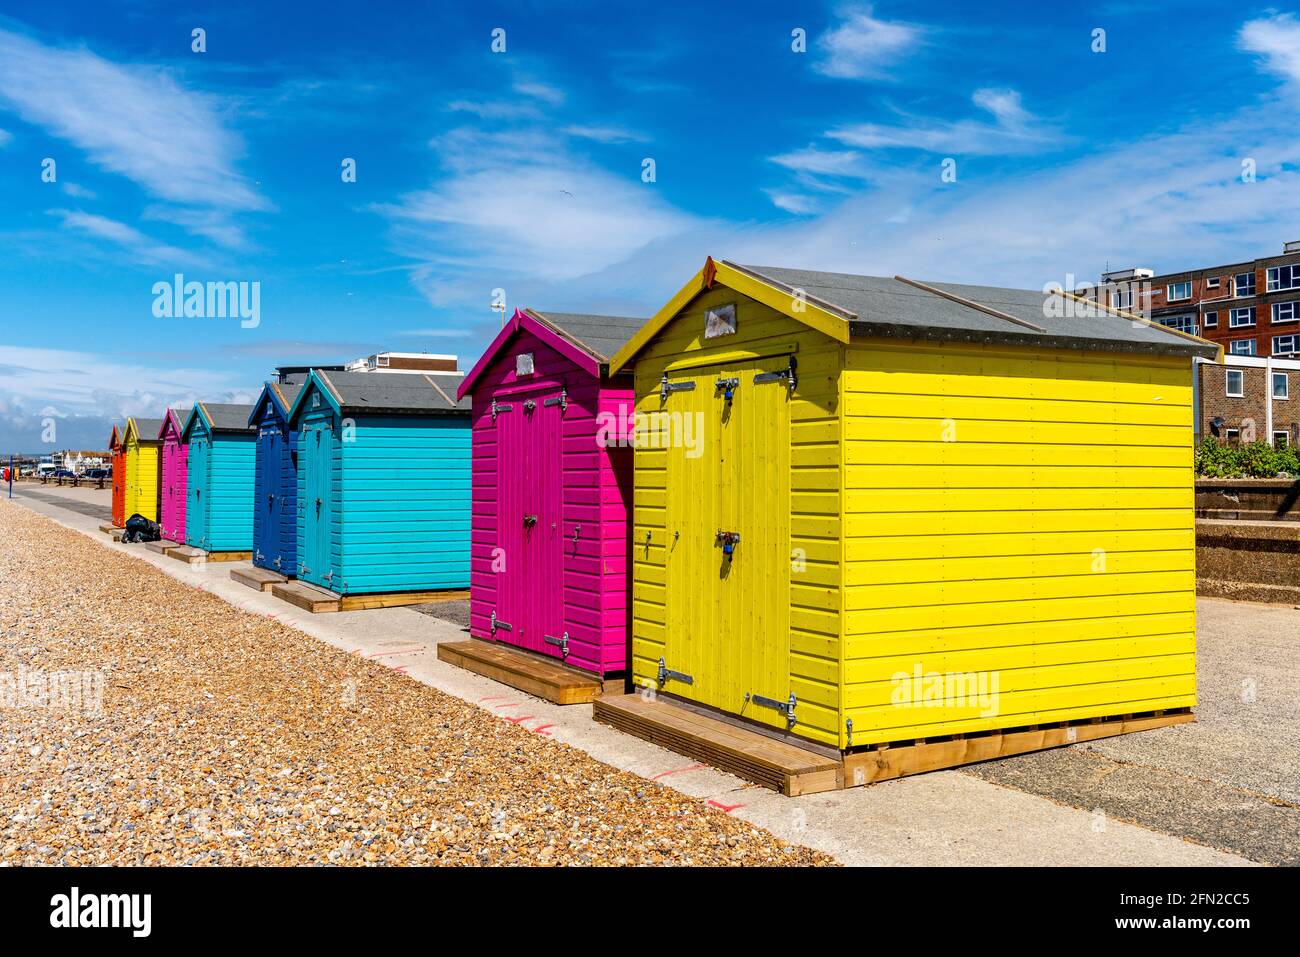 Colourful Beach Huts On The Seafront, Seaford, East Sussex, UK. Stock Photo